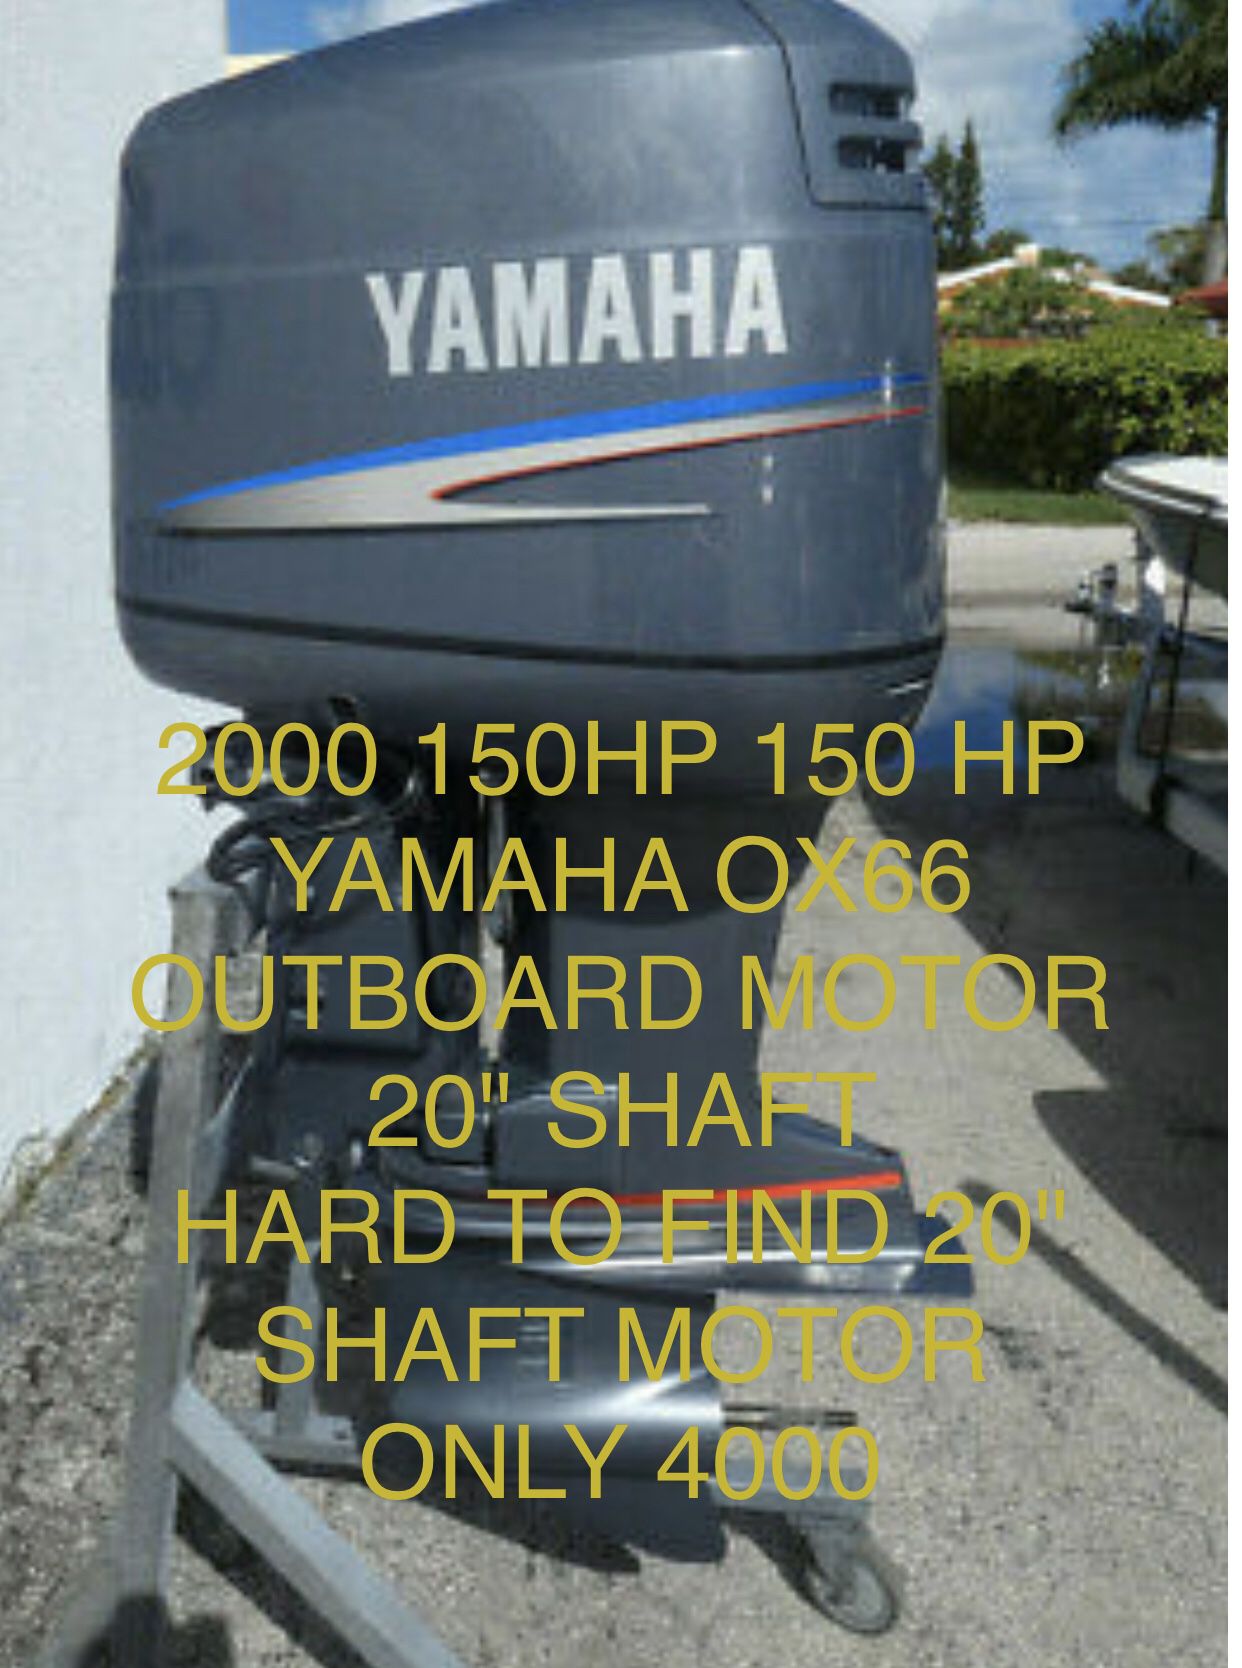 2000 150hp YAMAHA OX66 OUTBOARD MOTOR WITH HARD TO FIND 20" SHAFT MOTOR ! Great for skinny water 💦 come by today and see her running like a top !!!